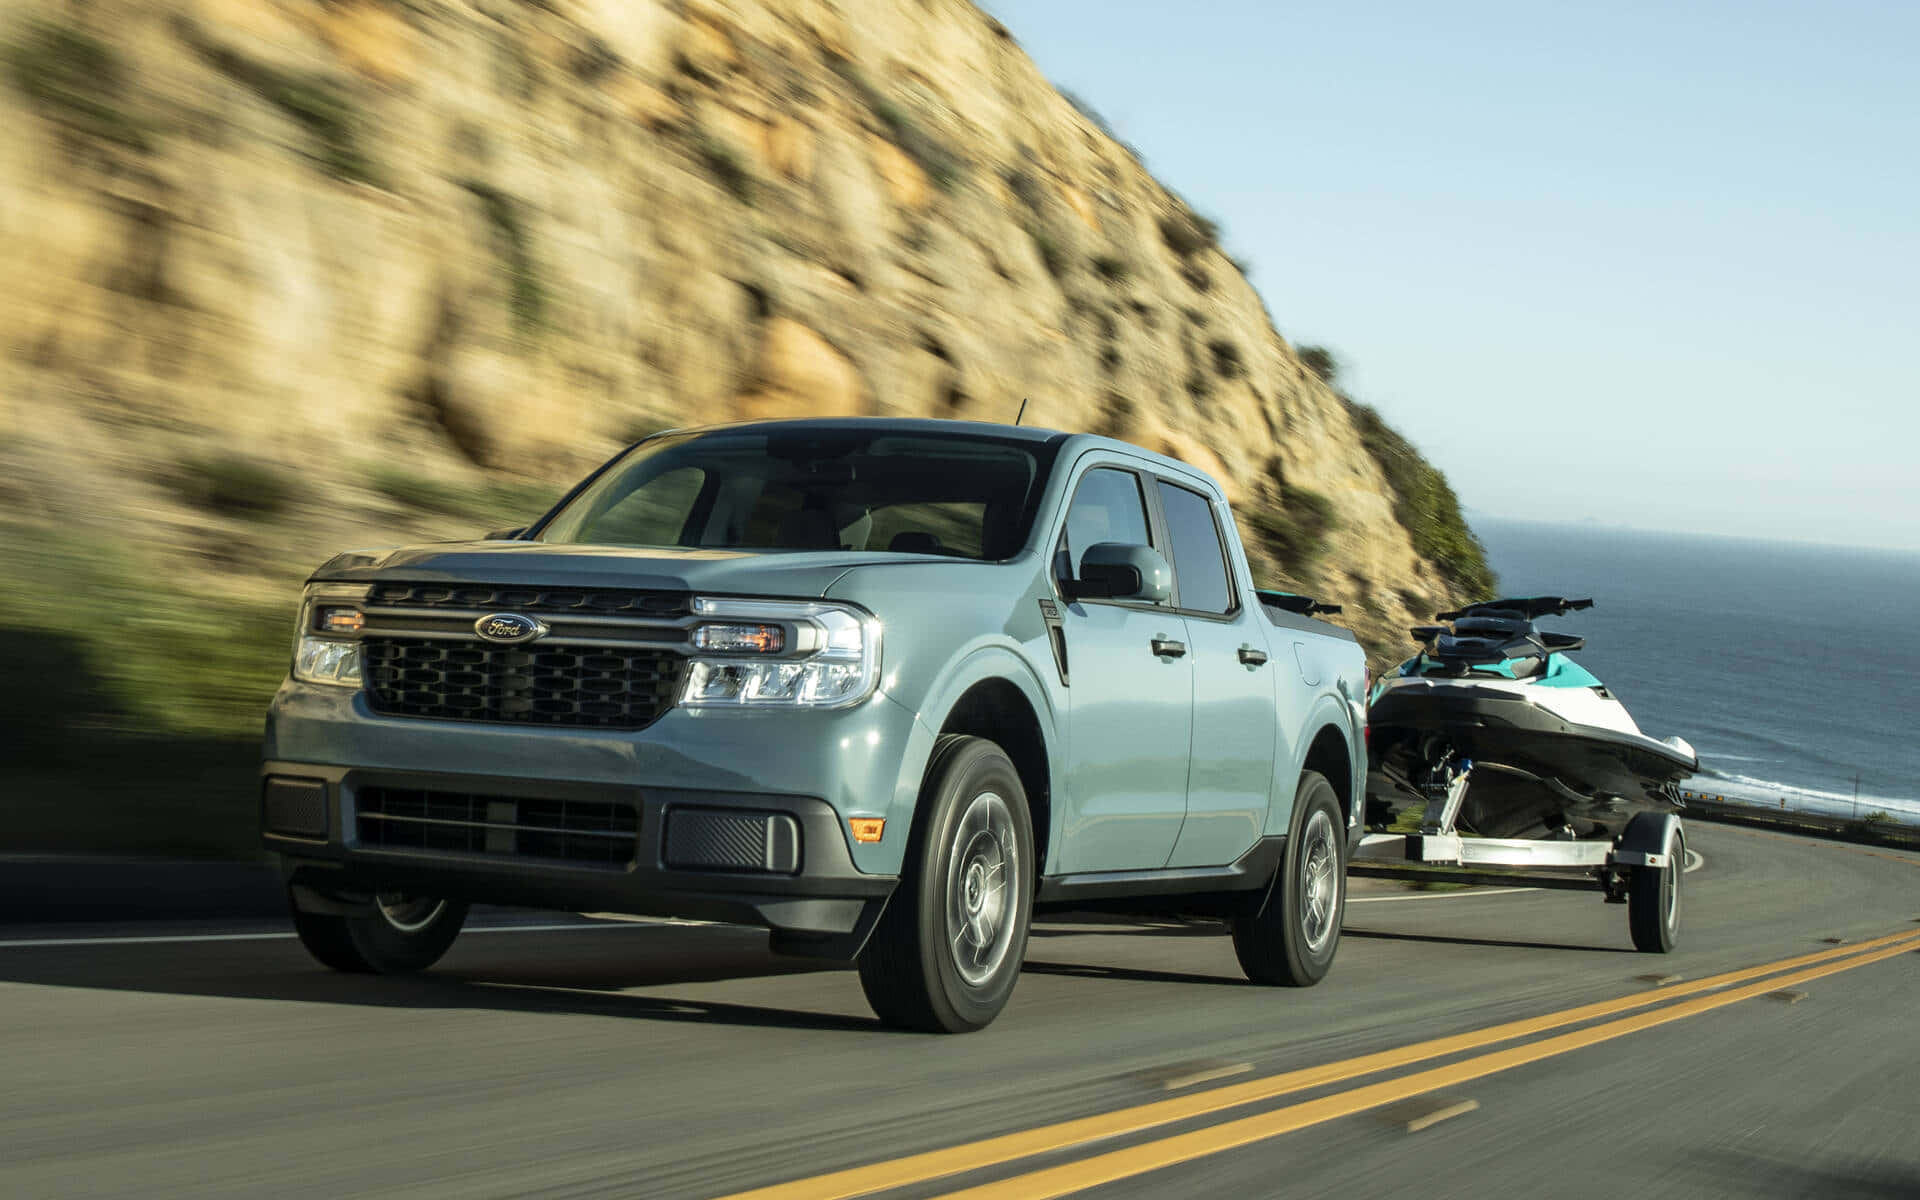 The 2020 Ford F-150 Is Towing A Boat On A Road